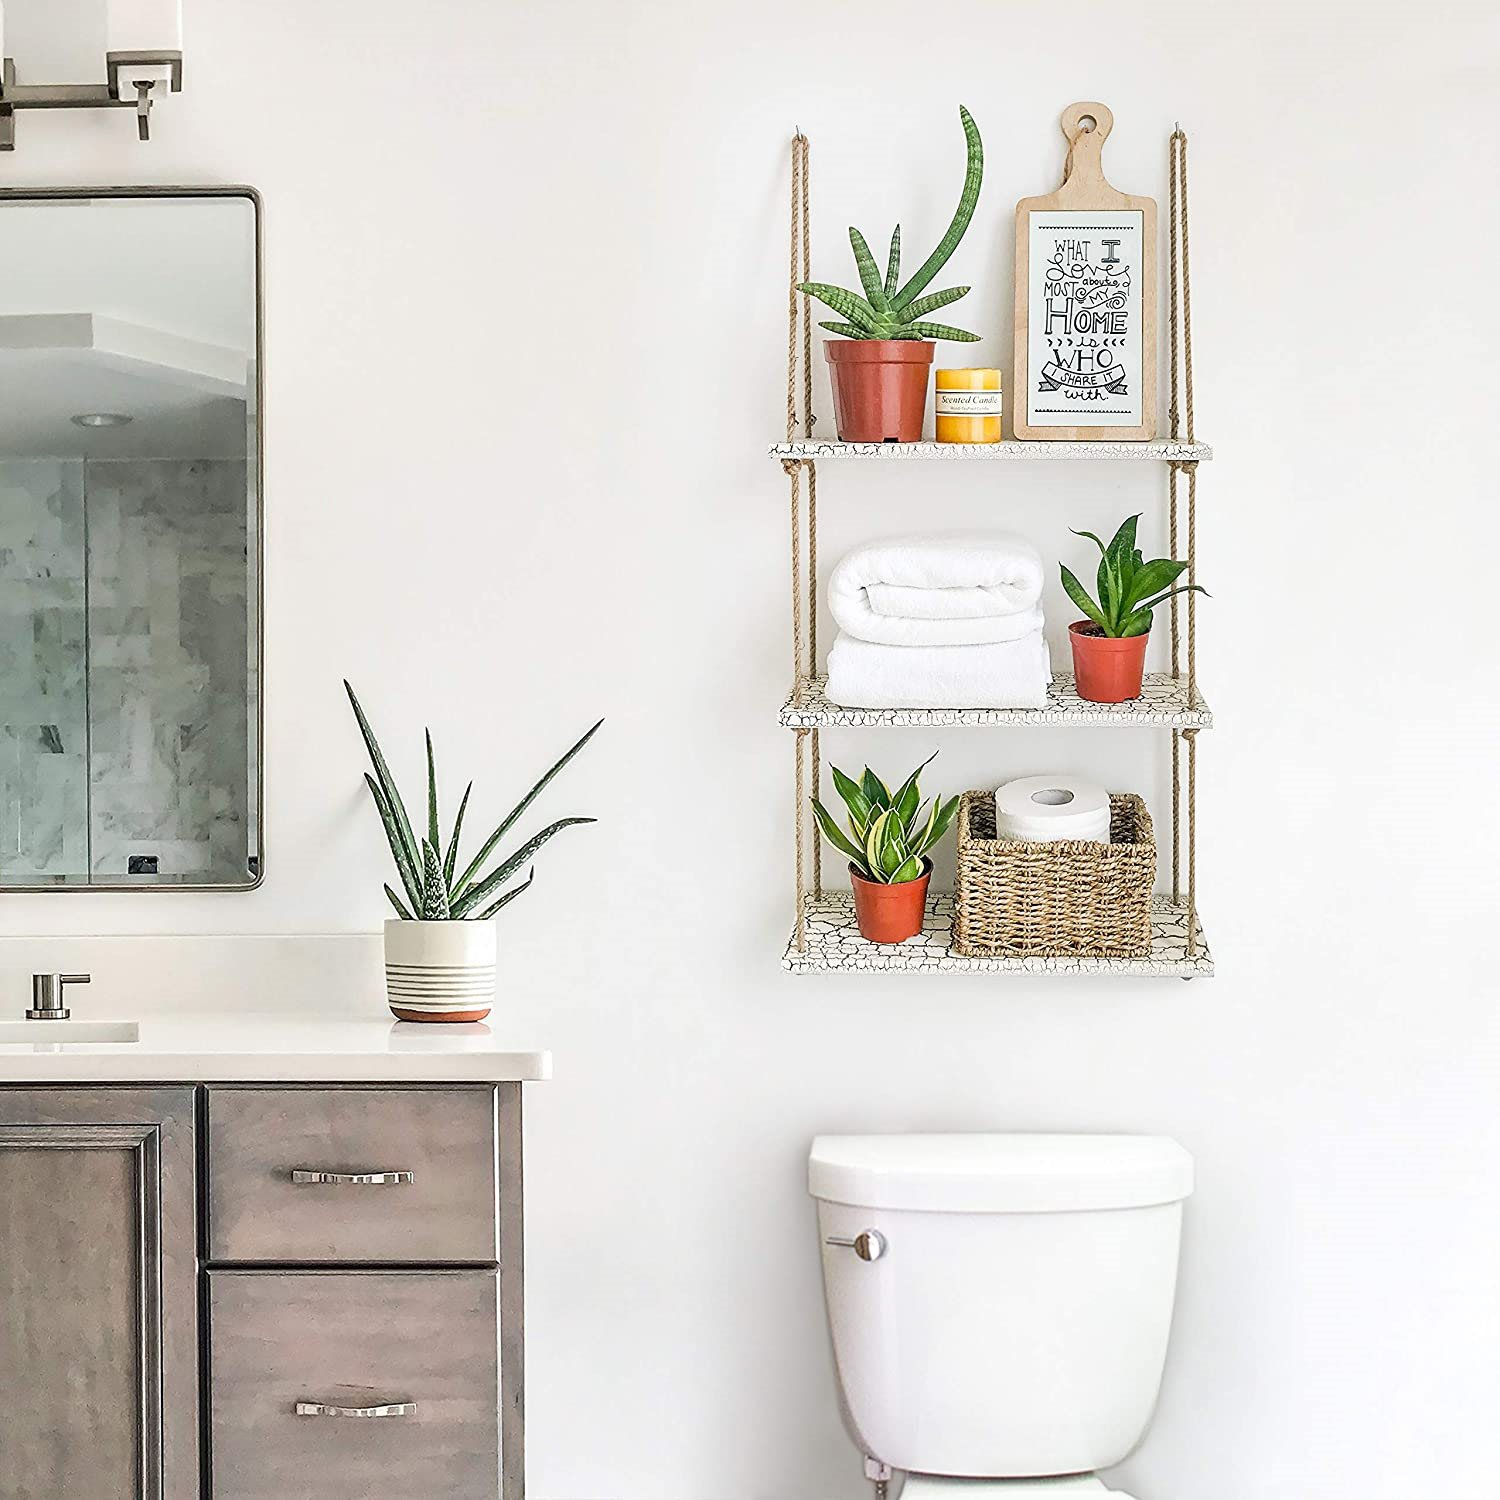 hanging-shelf-with-plants-and-towels-above-the-toilet-40222.jpg